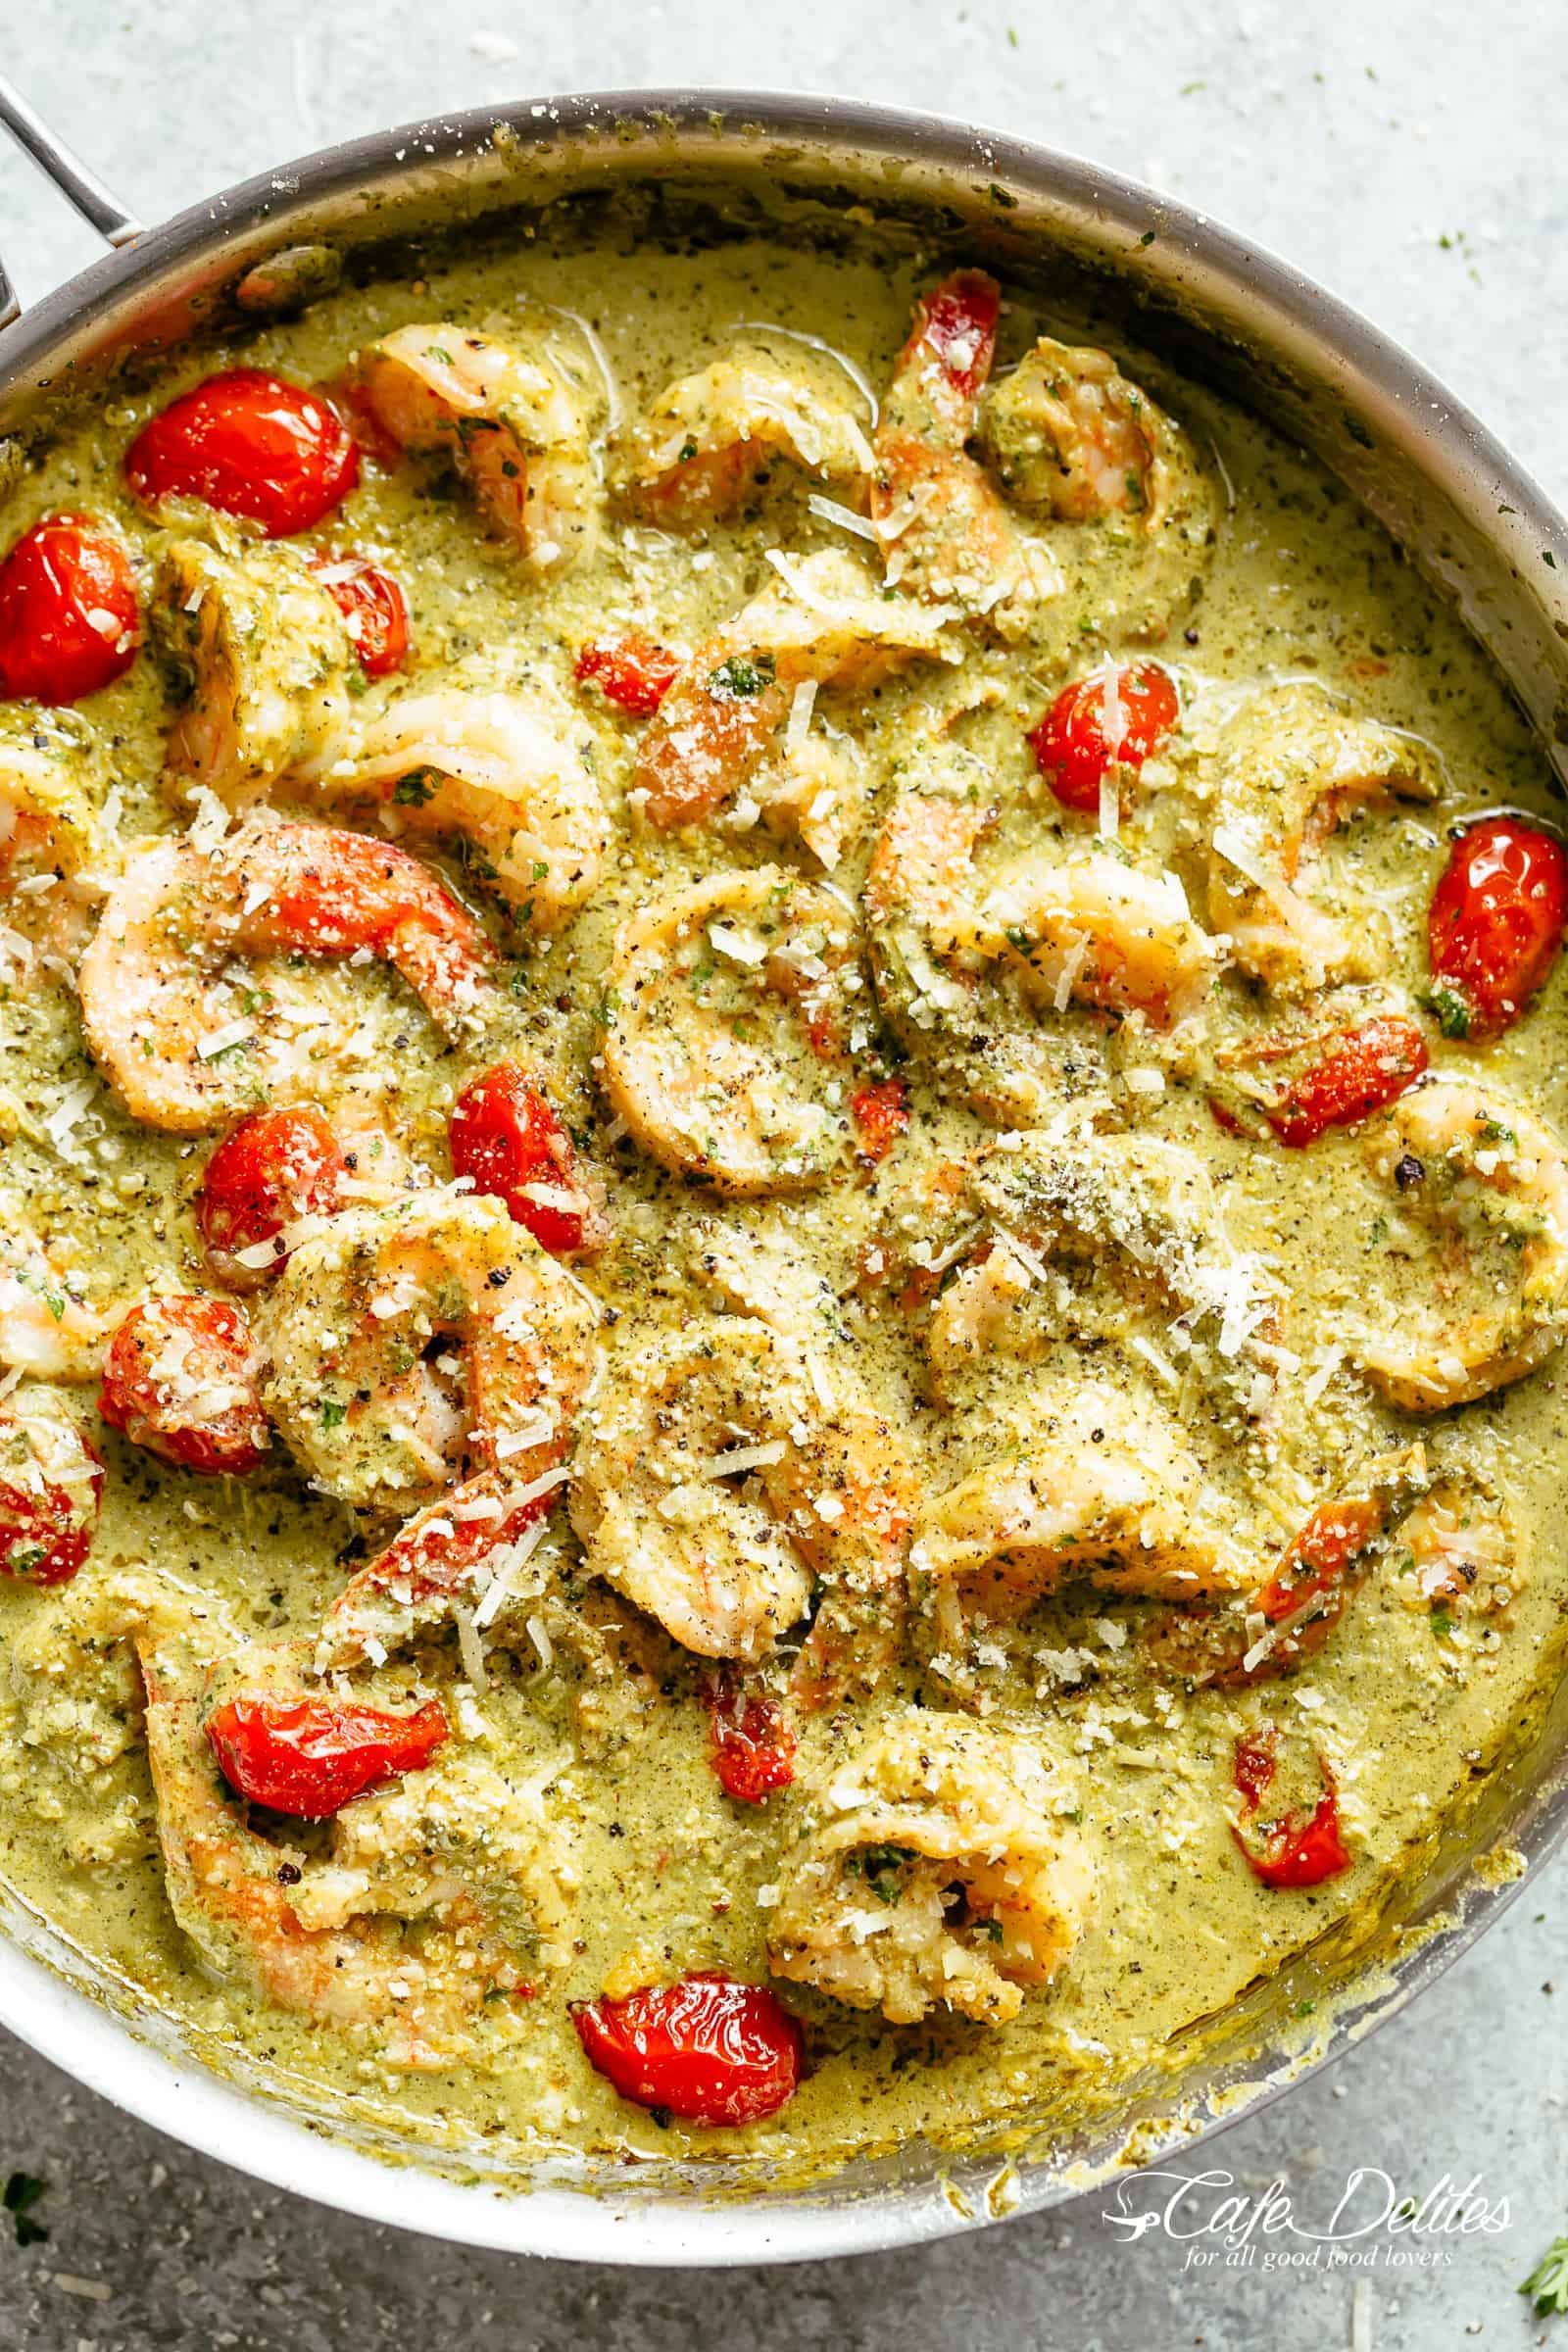 Creamy Pesto Shrimp Alfredo with parmesan cheese and blistered tomatoes is the shrimp recipe of your dreams! Ready in less than 10 minutes, gluten free AND low carb! Serve over zucchini noodles or cauliflower rice (OR pasta if you're not watching your carb intake)! | cafedelites.com